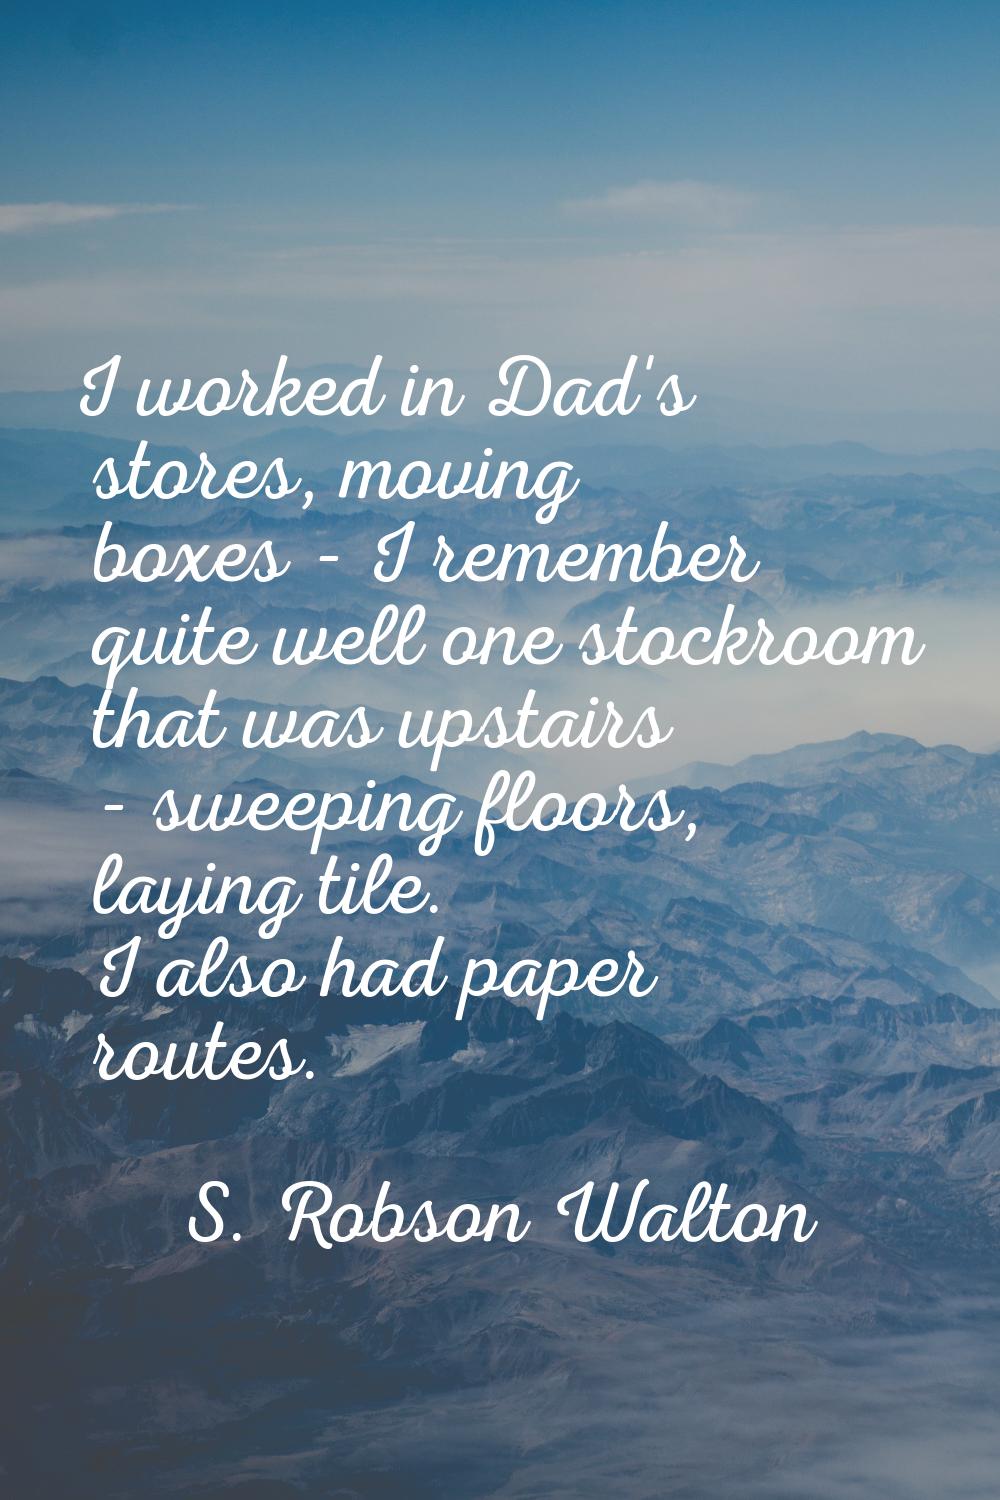 I worked in Dad's stores, moving boxes - I remember quite well one stockroom that was upstairs - sw